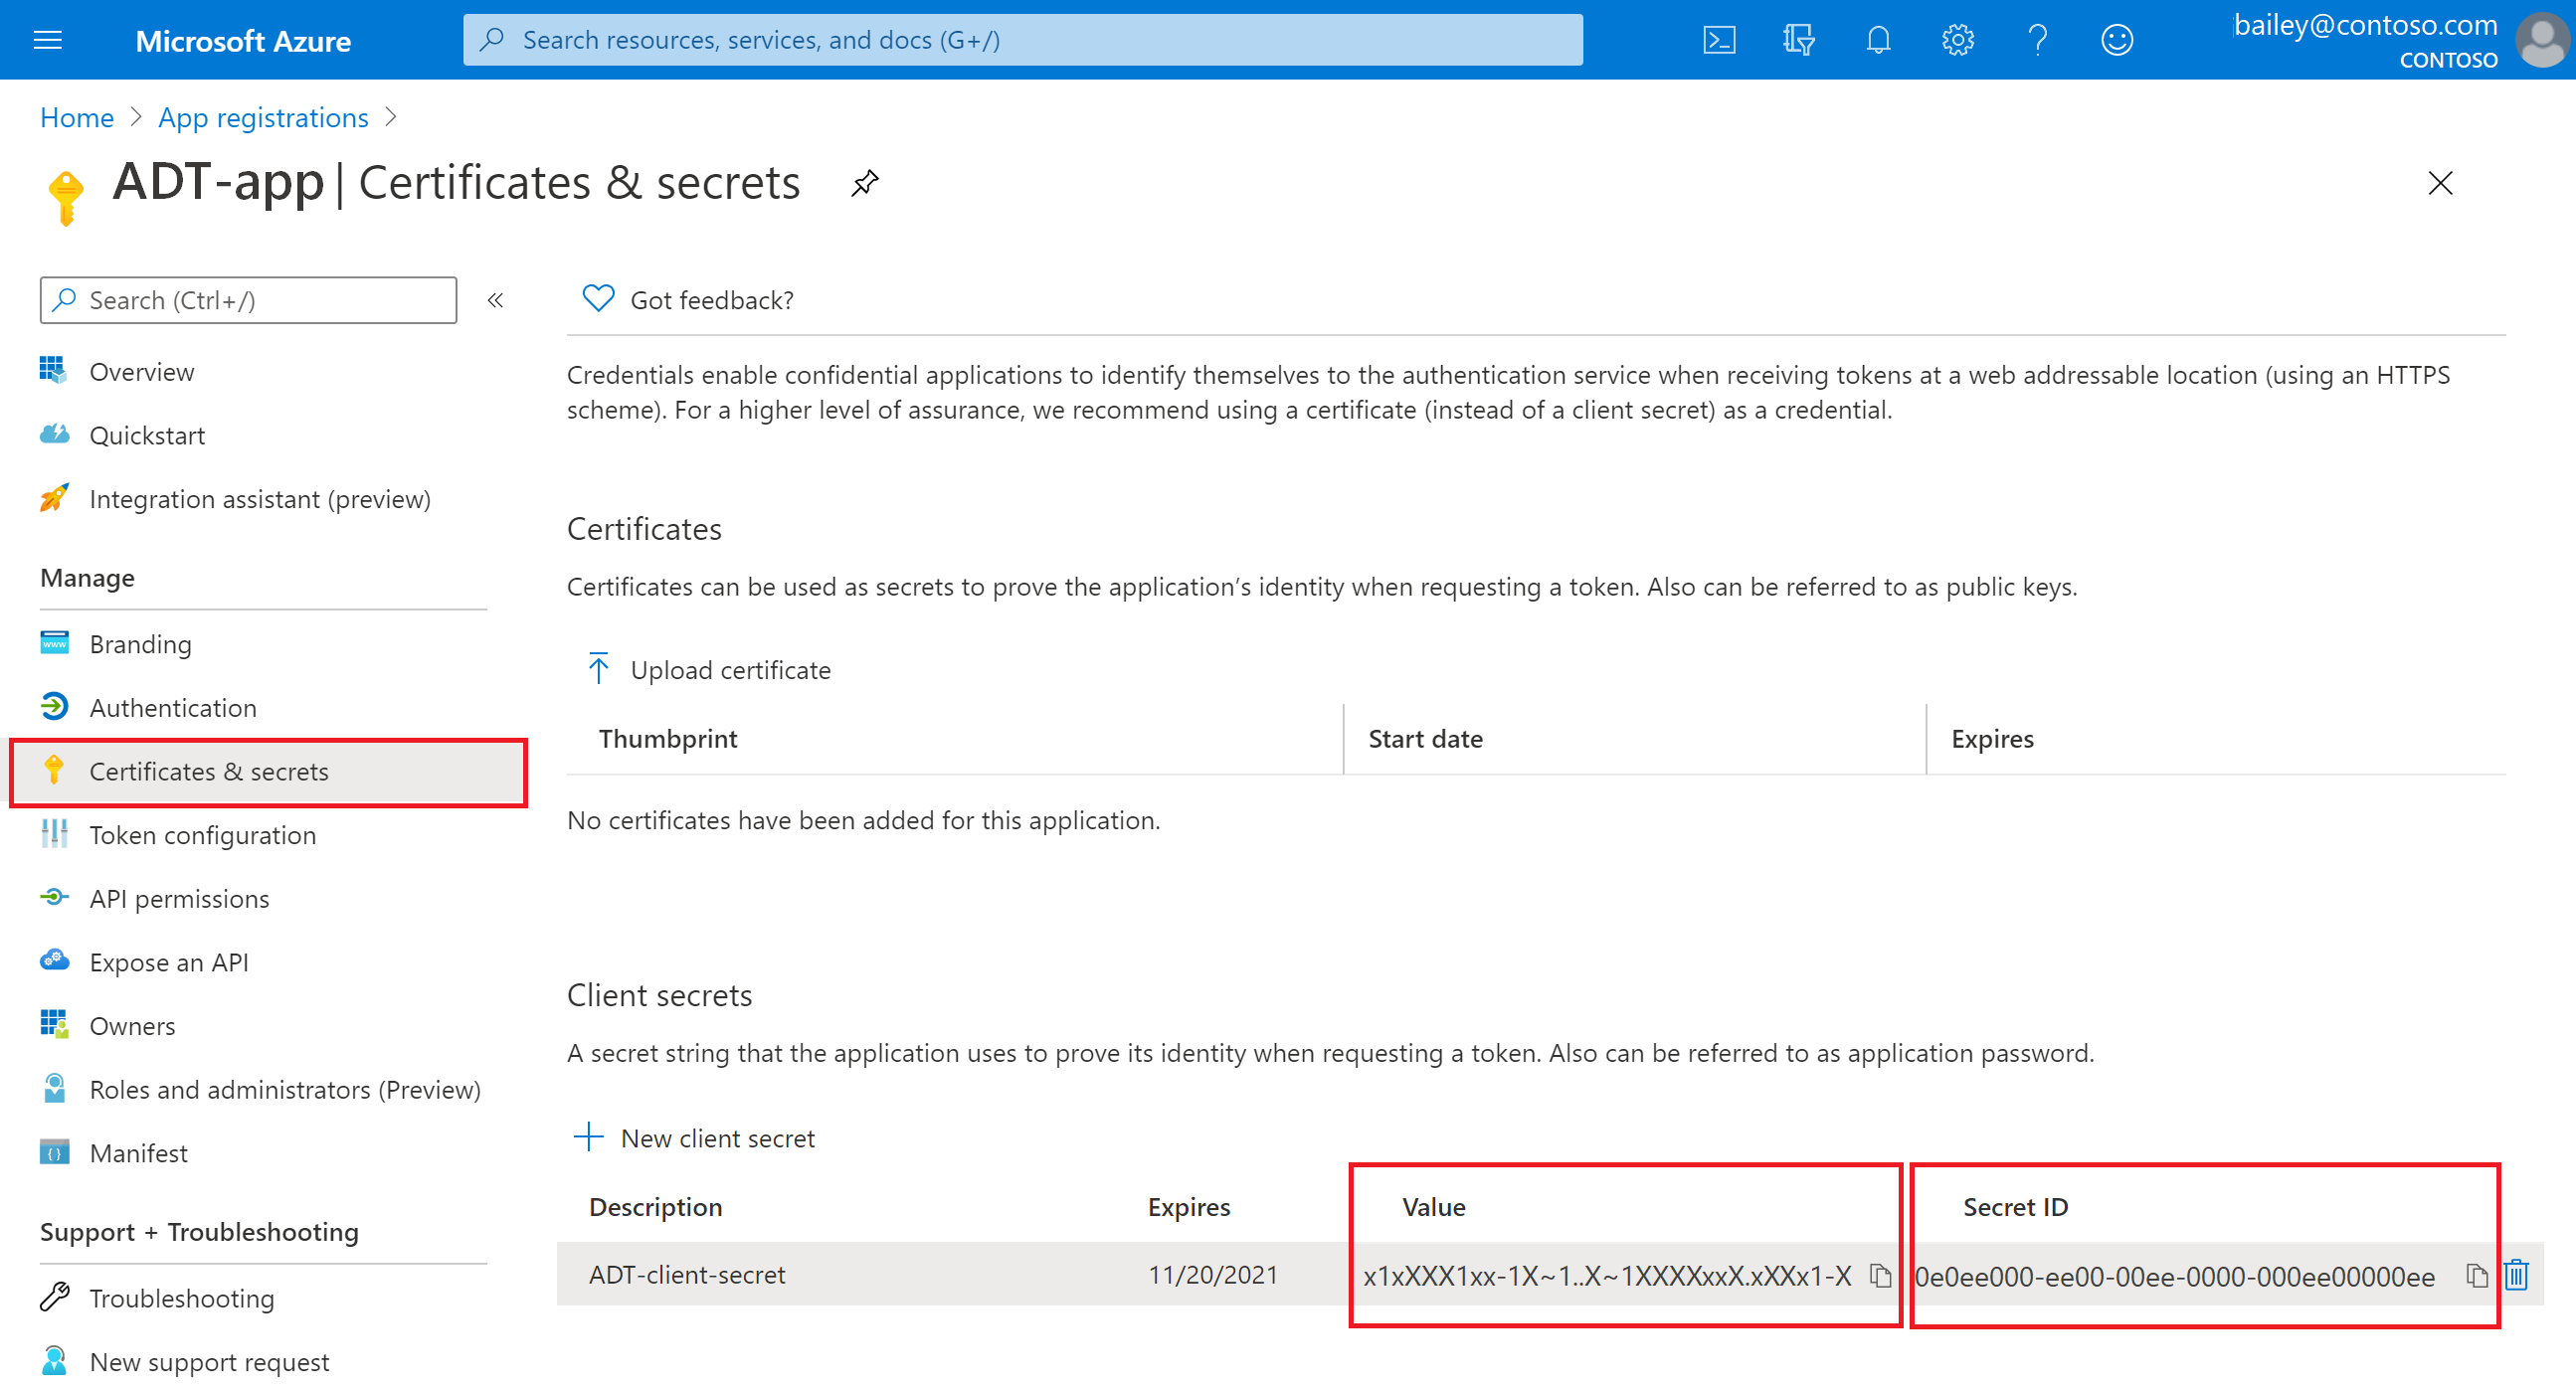 Screenshot of the Azure portal showing how to copy the client secret value.